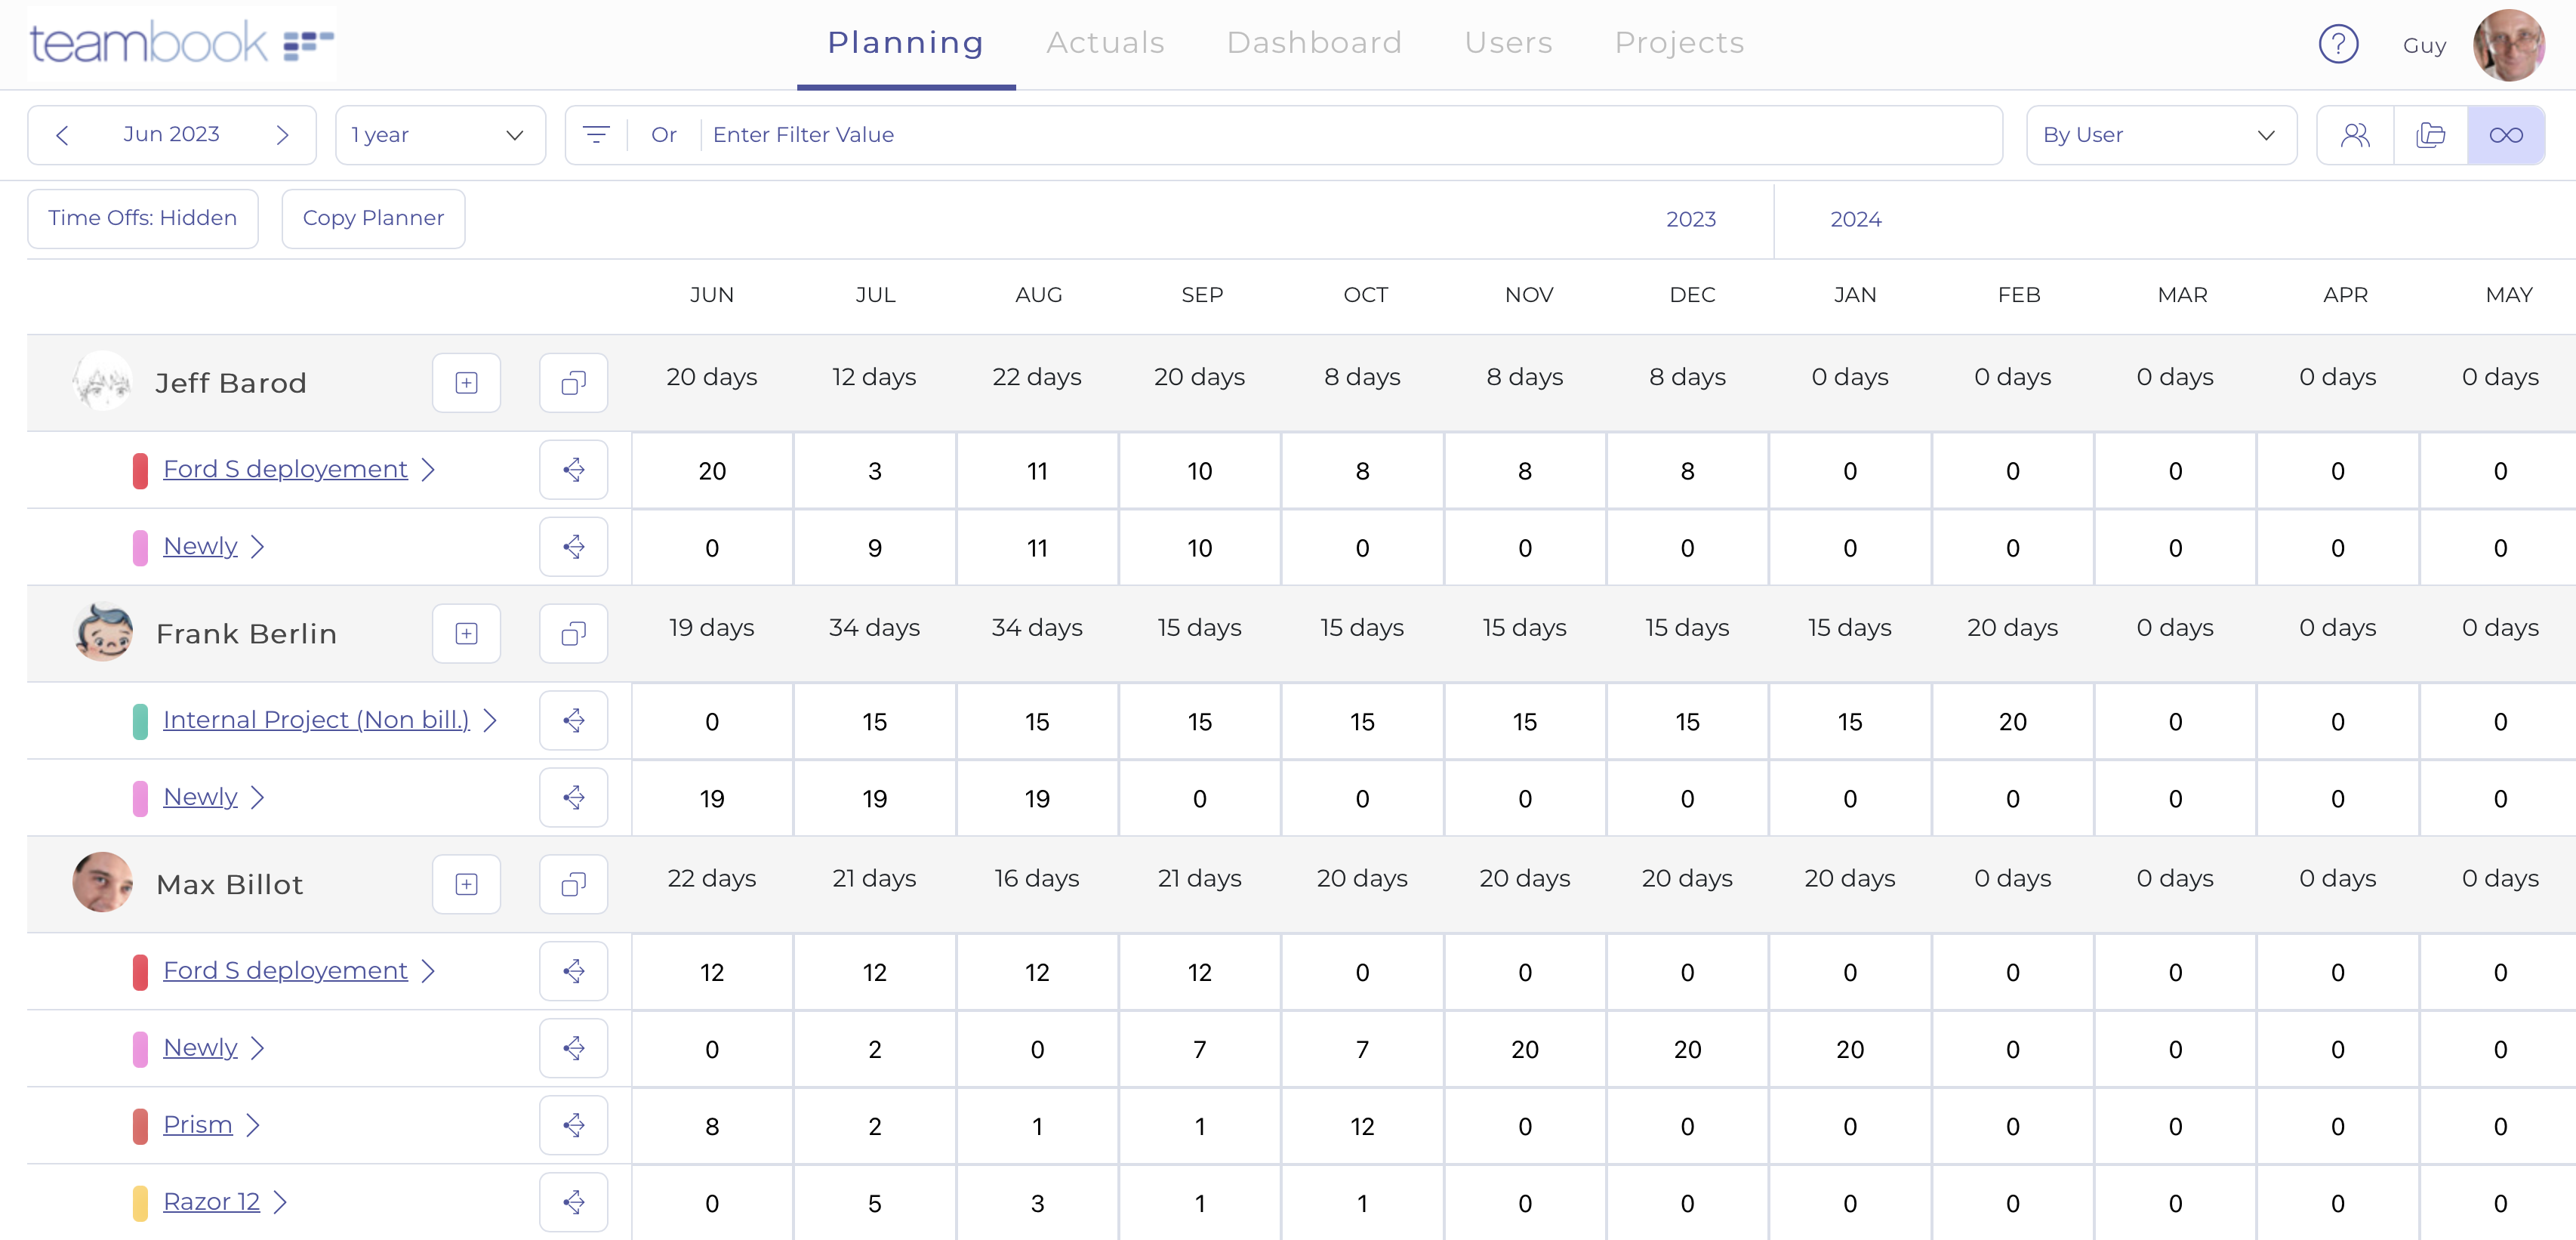 Teambook - 6-24 months resources & projects capacity planning